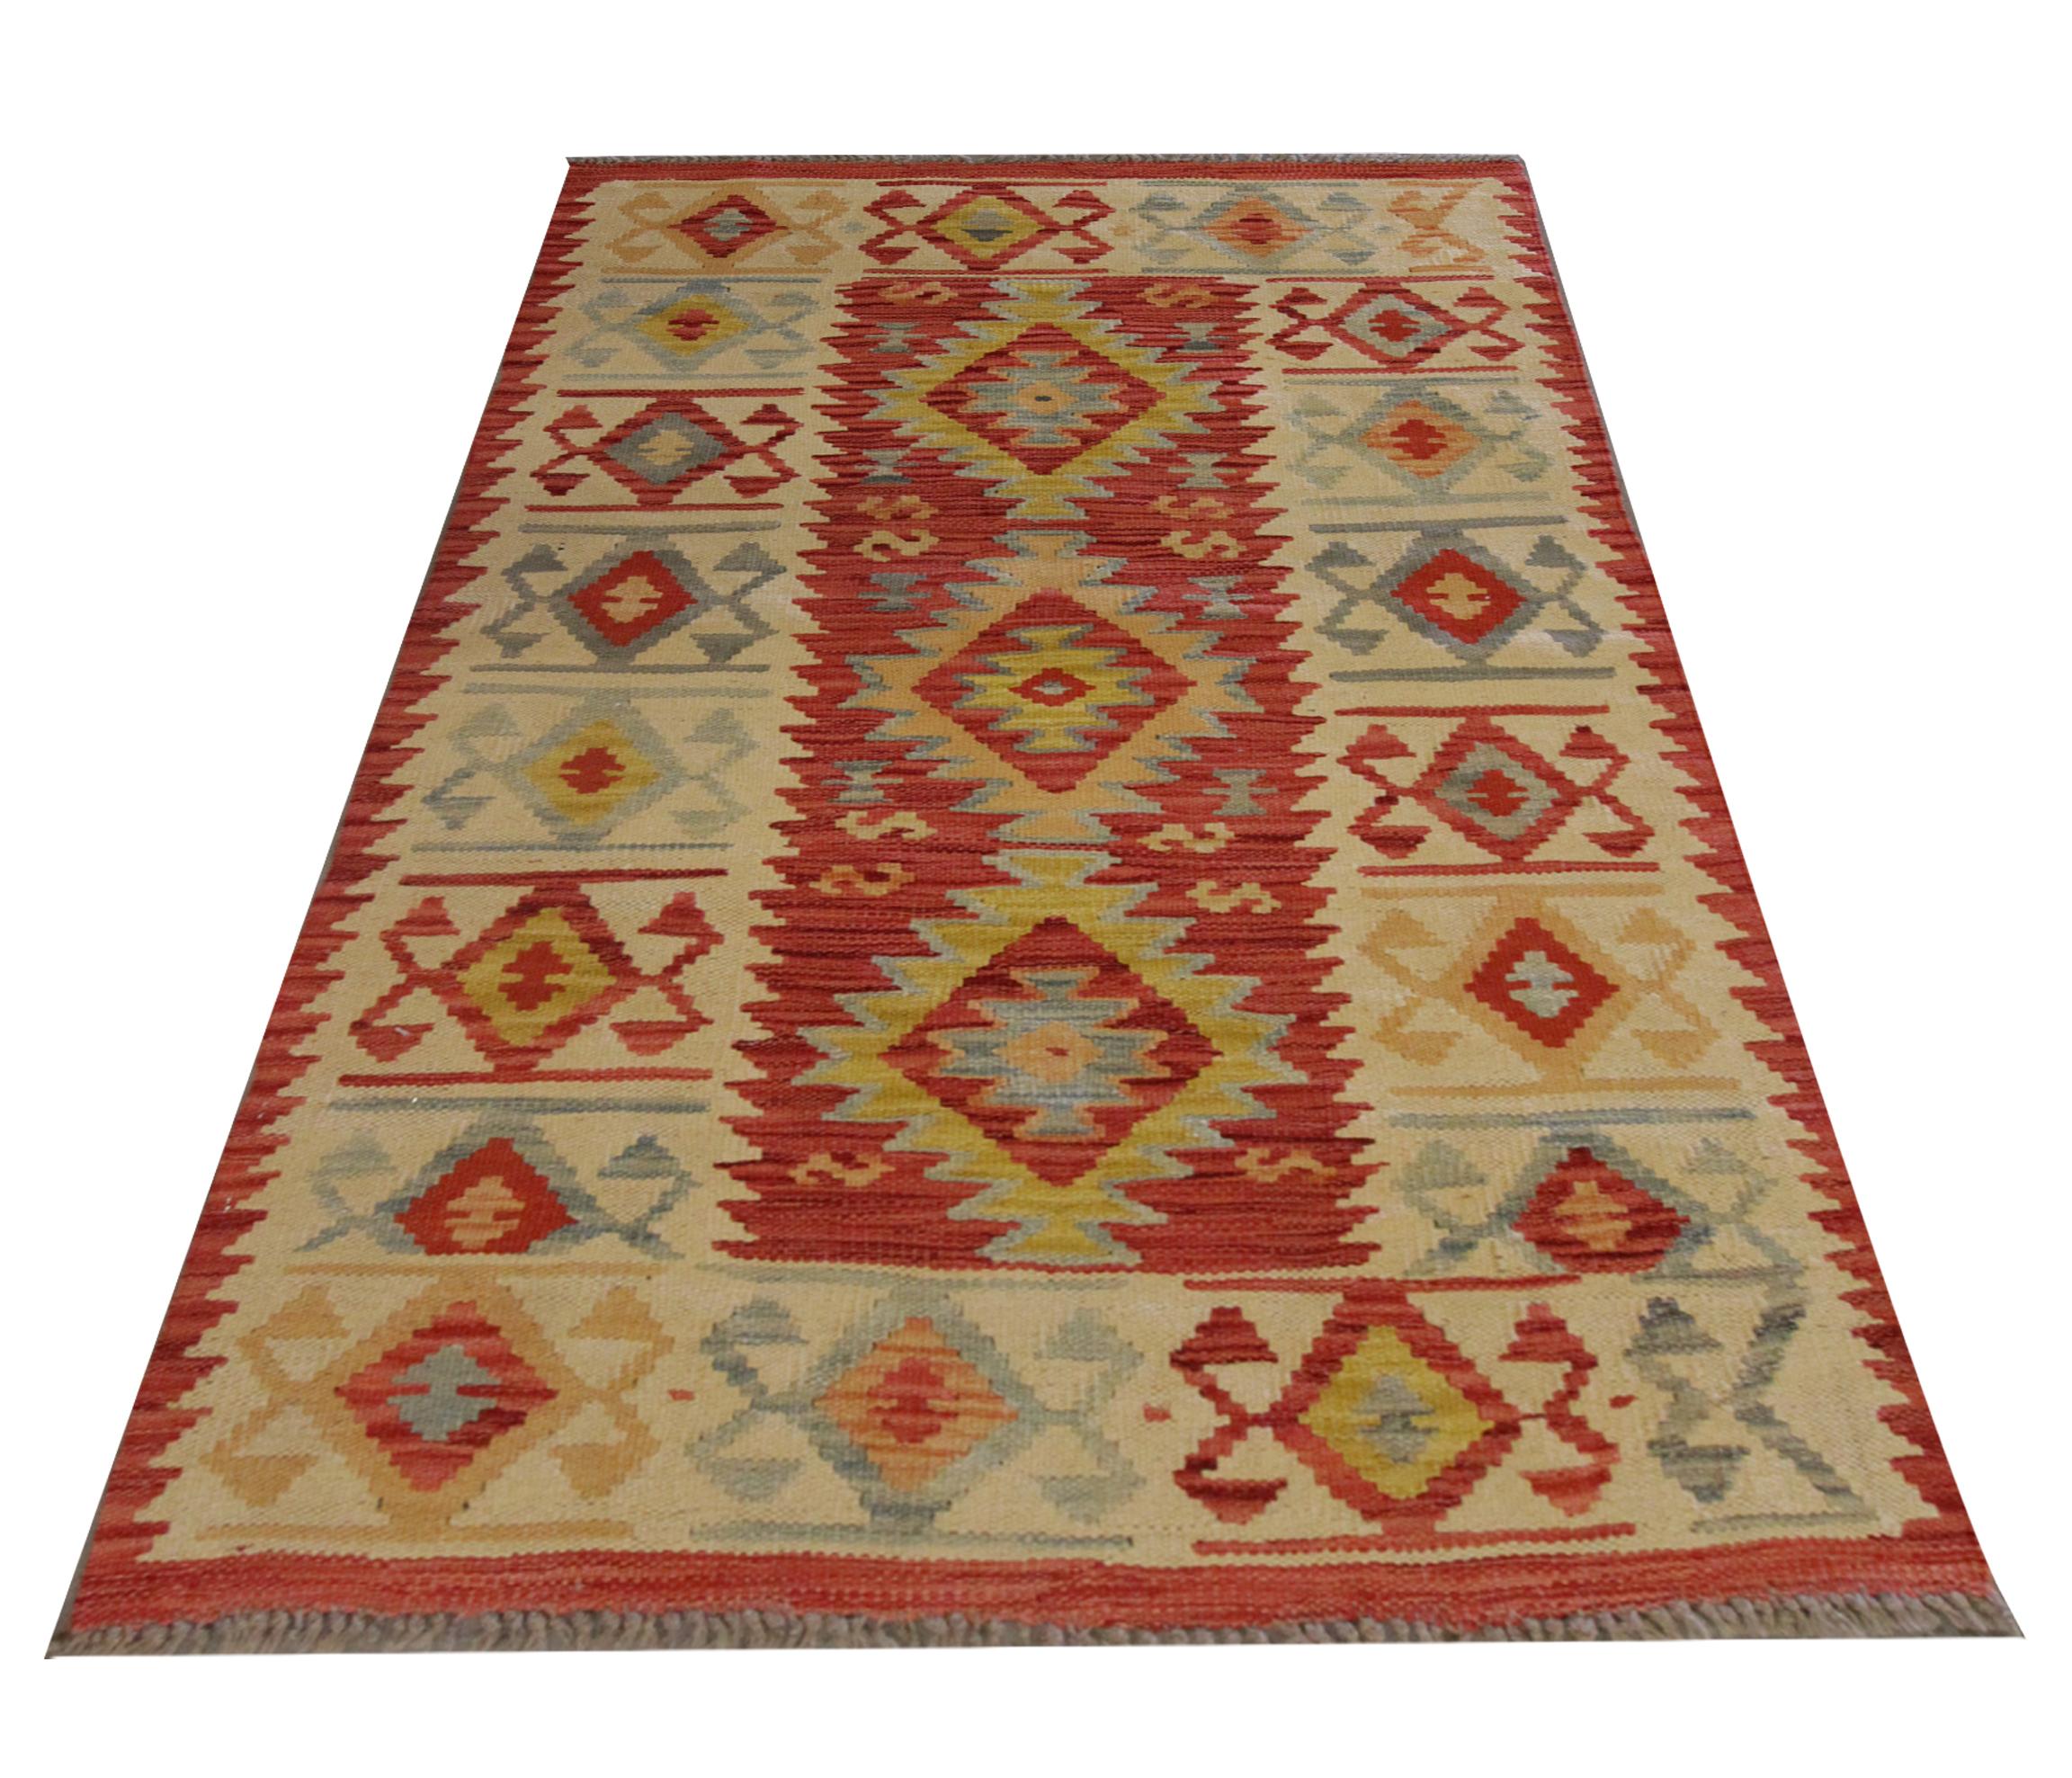 This rich red wool area rug is a handwoven kilim constructed in the early 21st century. The design features a trio of geometric motifs woven in yellow, orange, and grey accents on a rich red open field. This is then enclosed by a cream border with